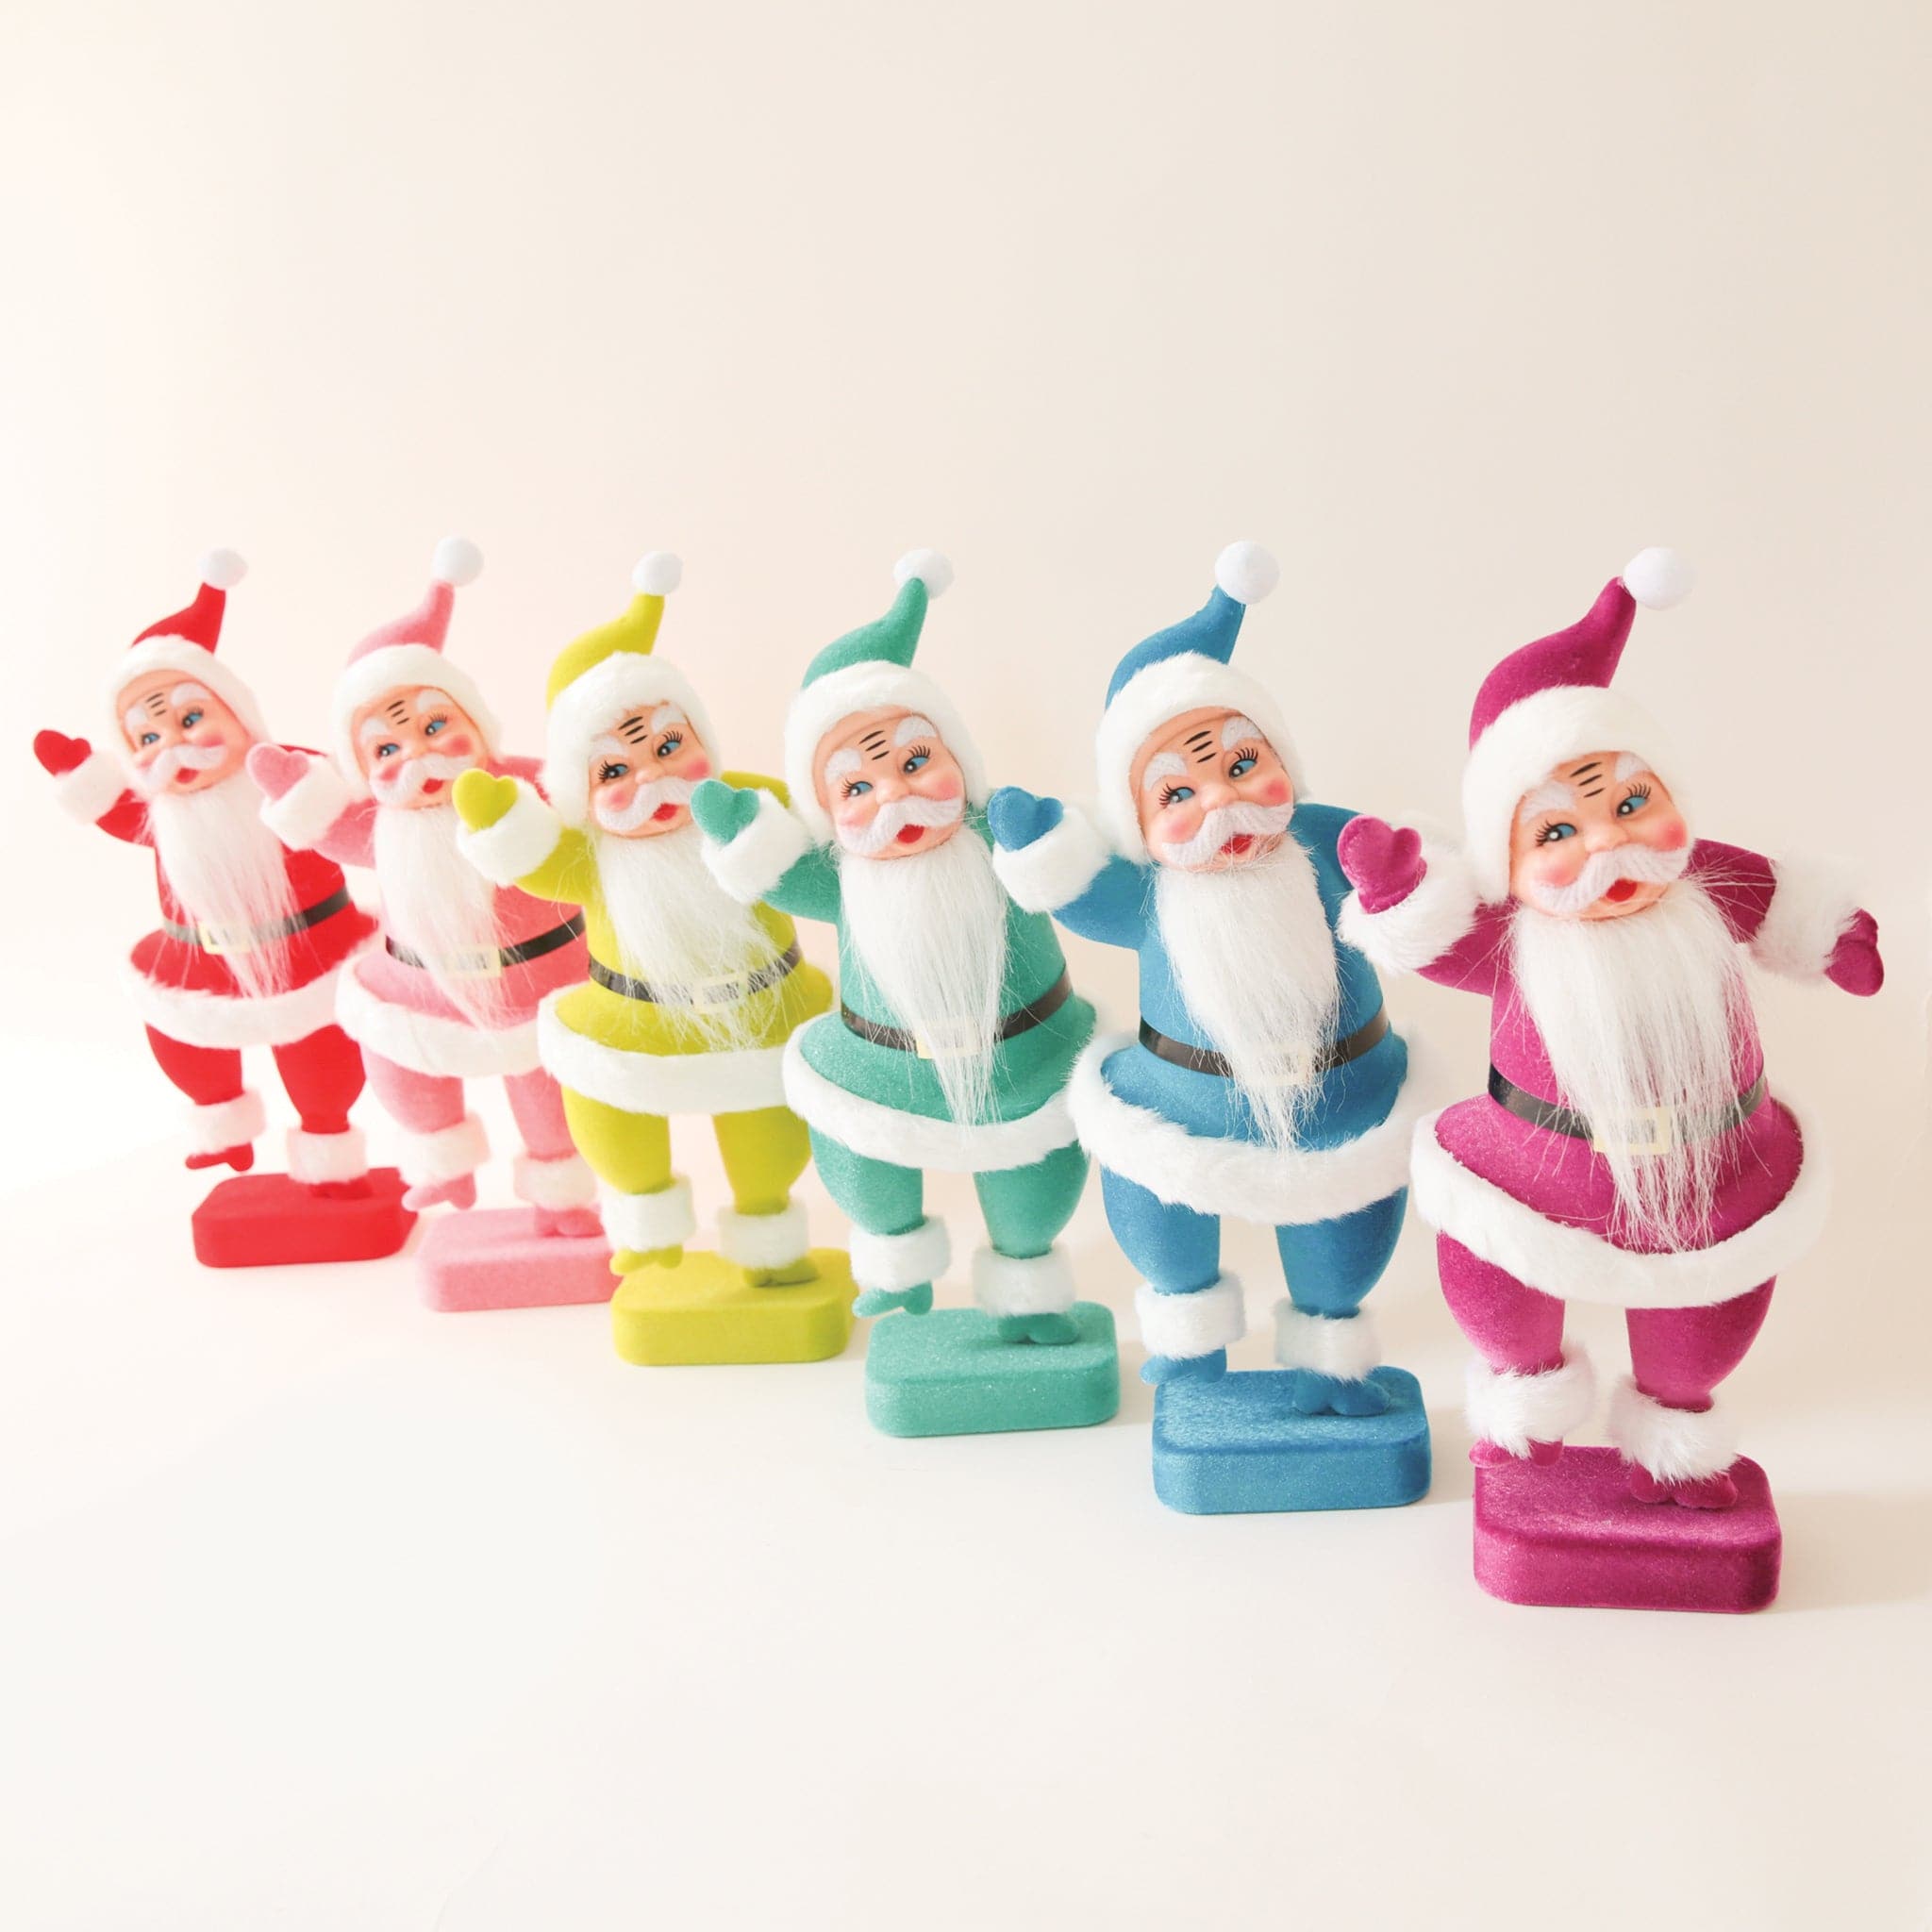 A plastic Santa figurine with a teal suit on with fuzzy cuffs and hat next to all the other colors available. 